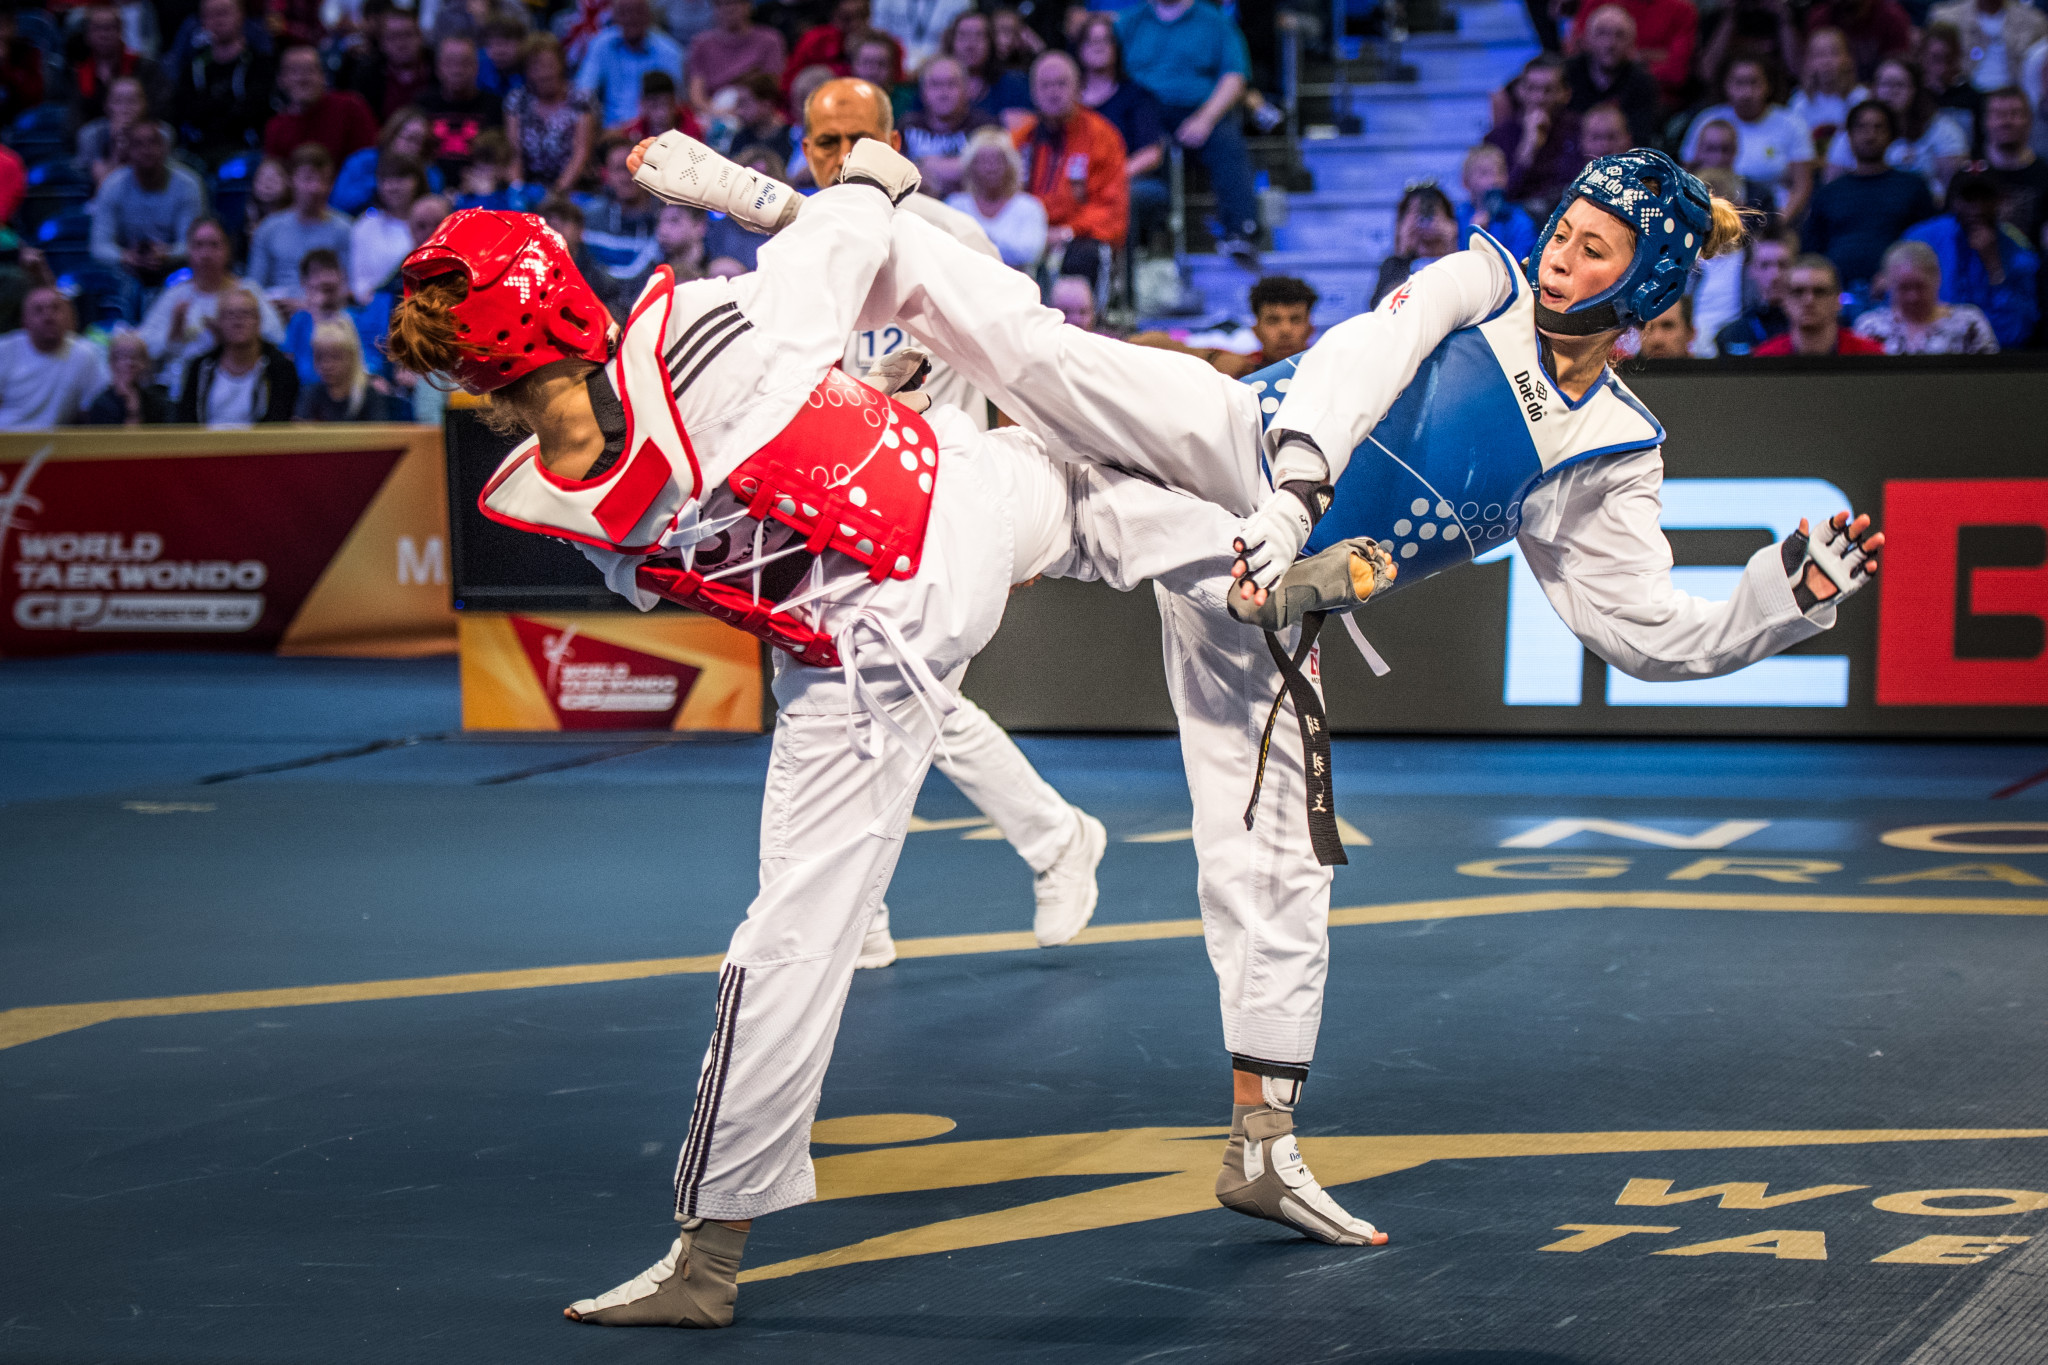 Jade Jones delighted the home fans on the final day of the World Taekwondo Grand Prix in Manchester ©World Taekwondo